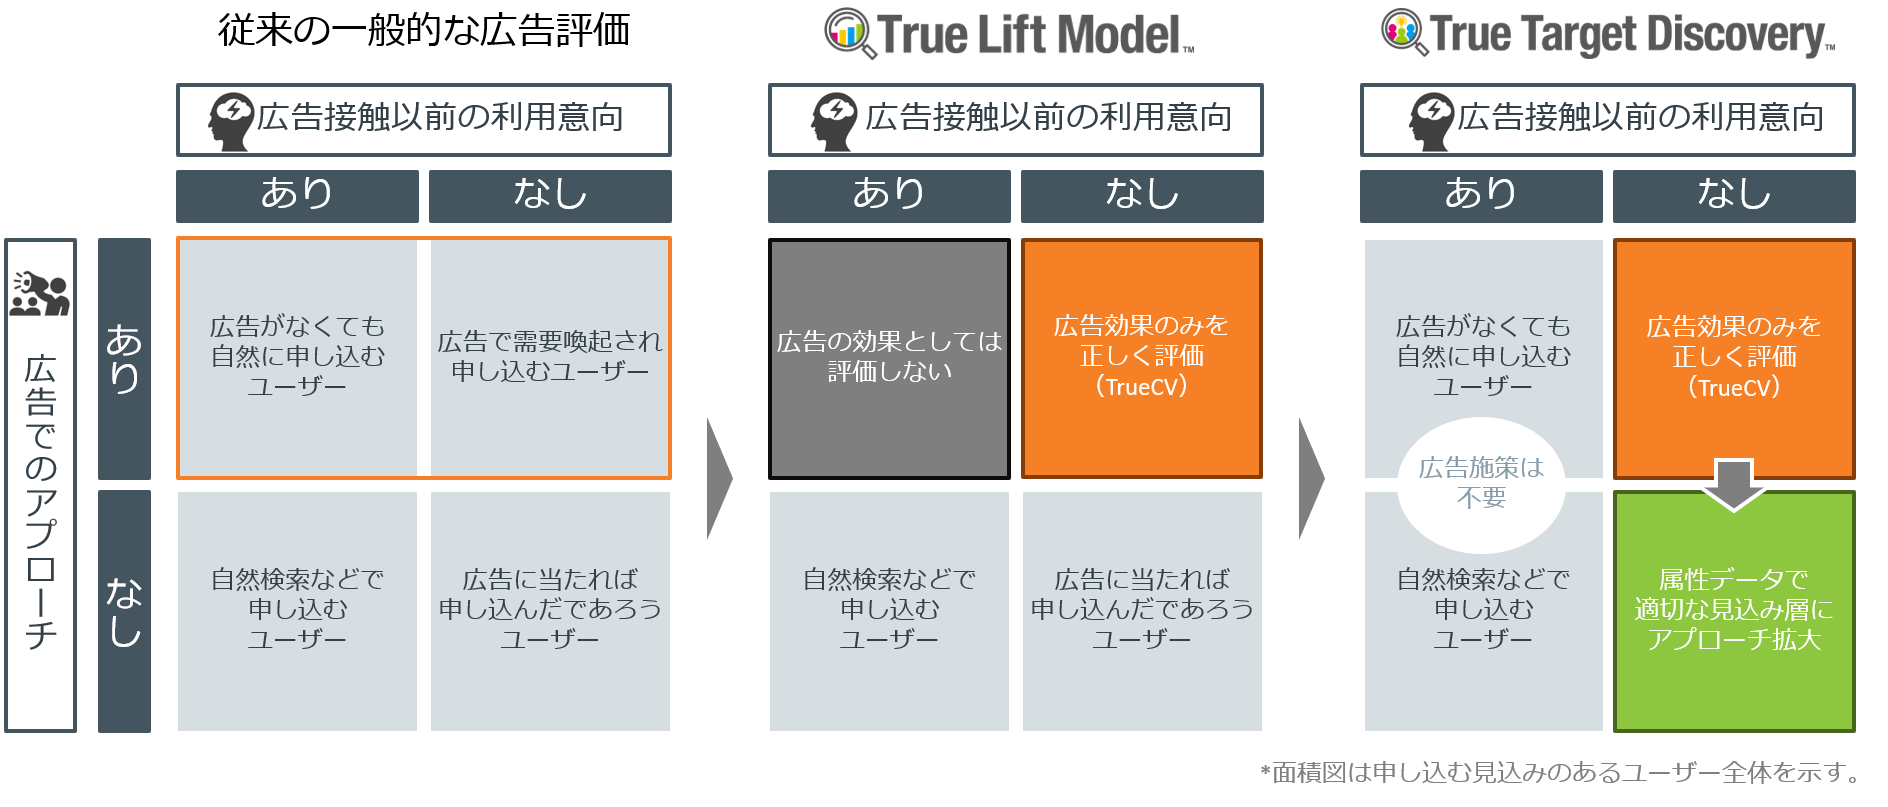 True Target Discovery_flow